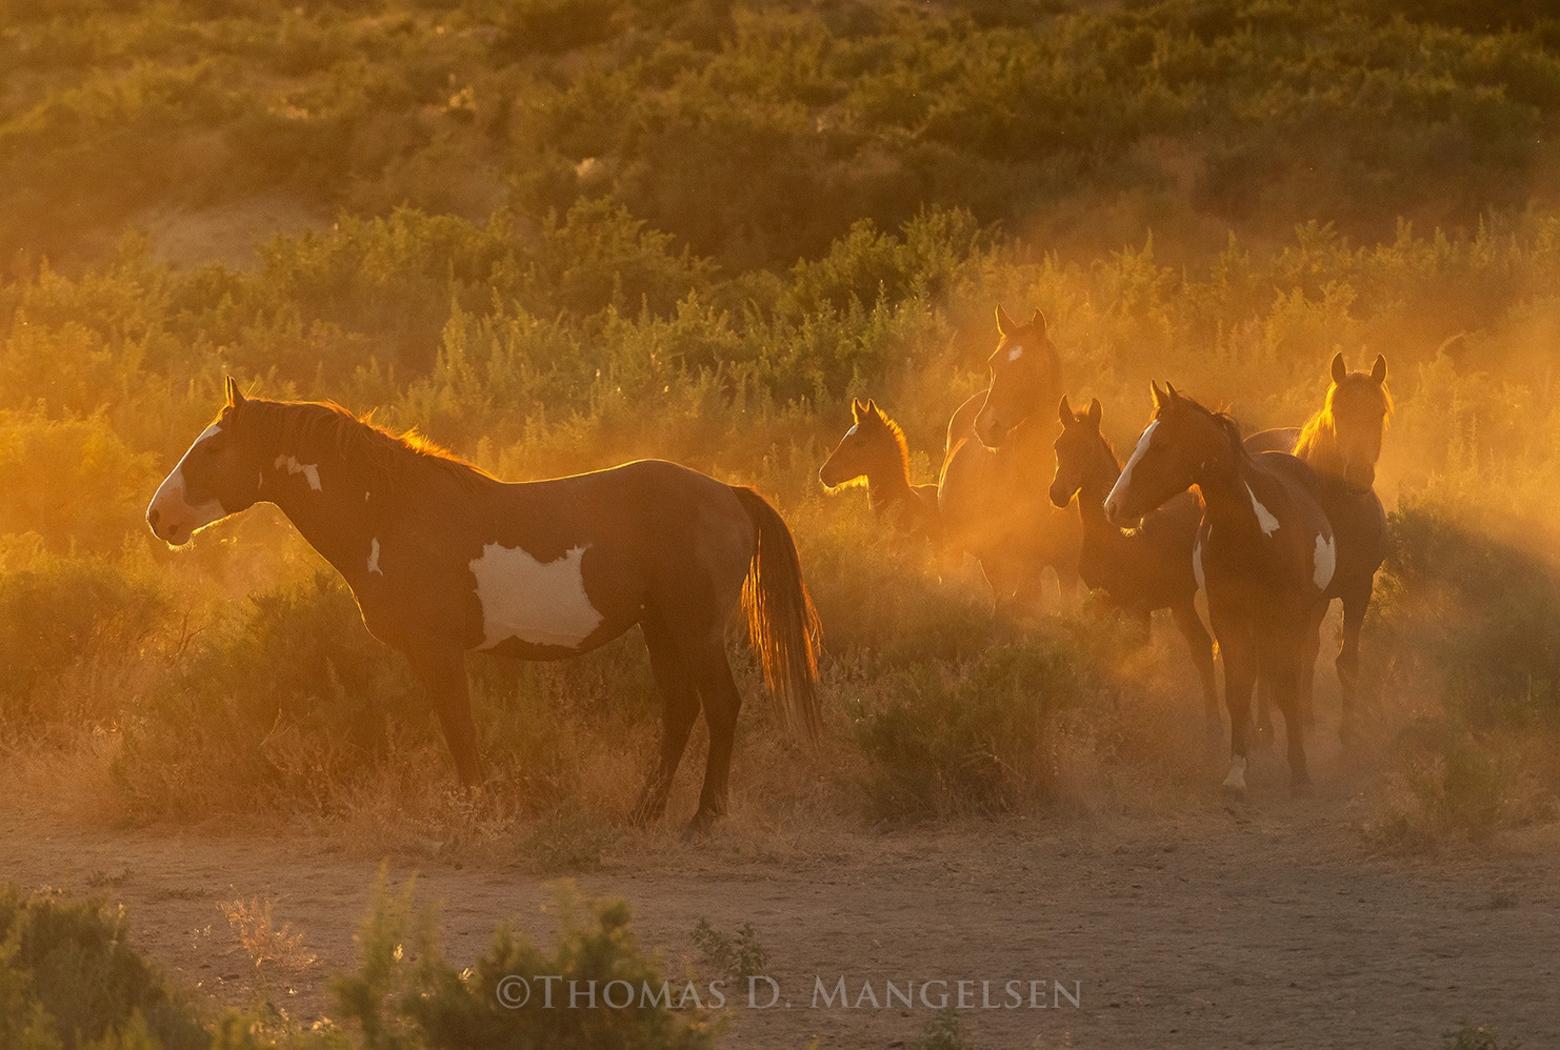 "Legends of the Plains," photograph of wild horses in Colorado by Thomas D. Mangelsen, all rights reserved. To see more of Mangelsen's limited edition collectible photography go to mangelsen.com